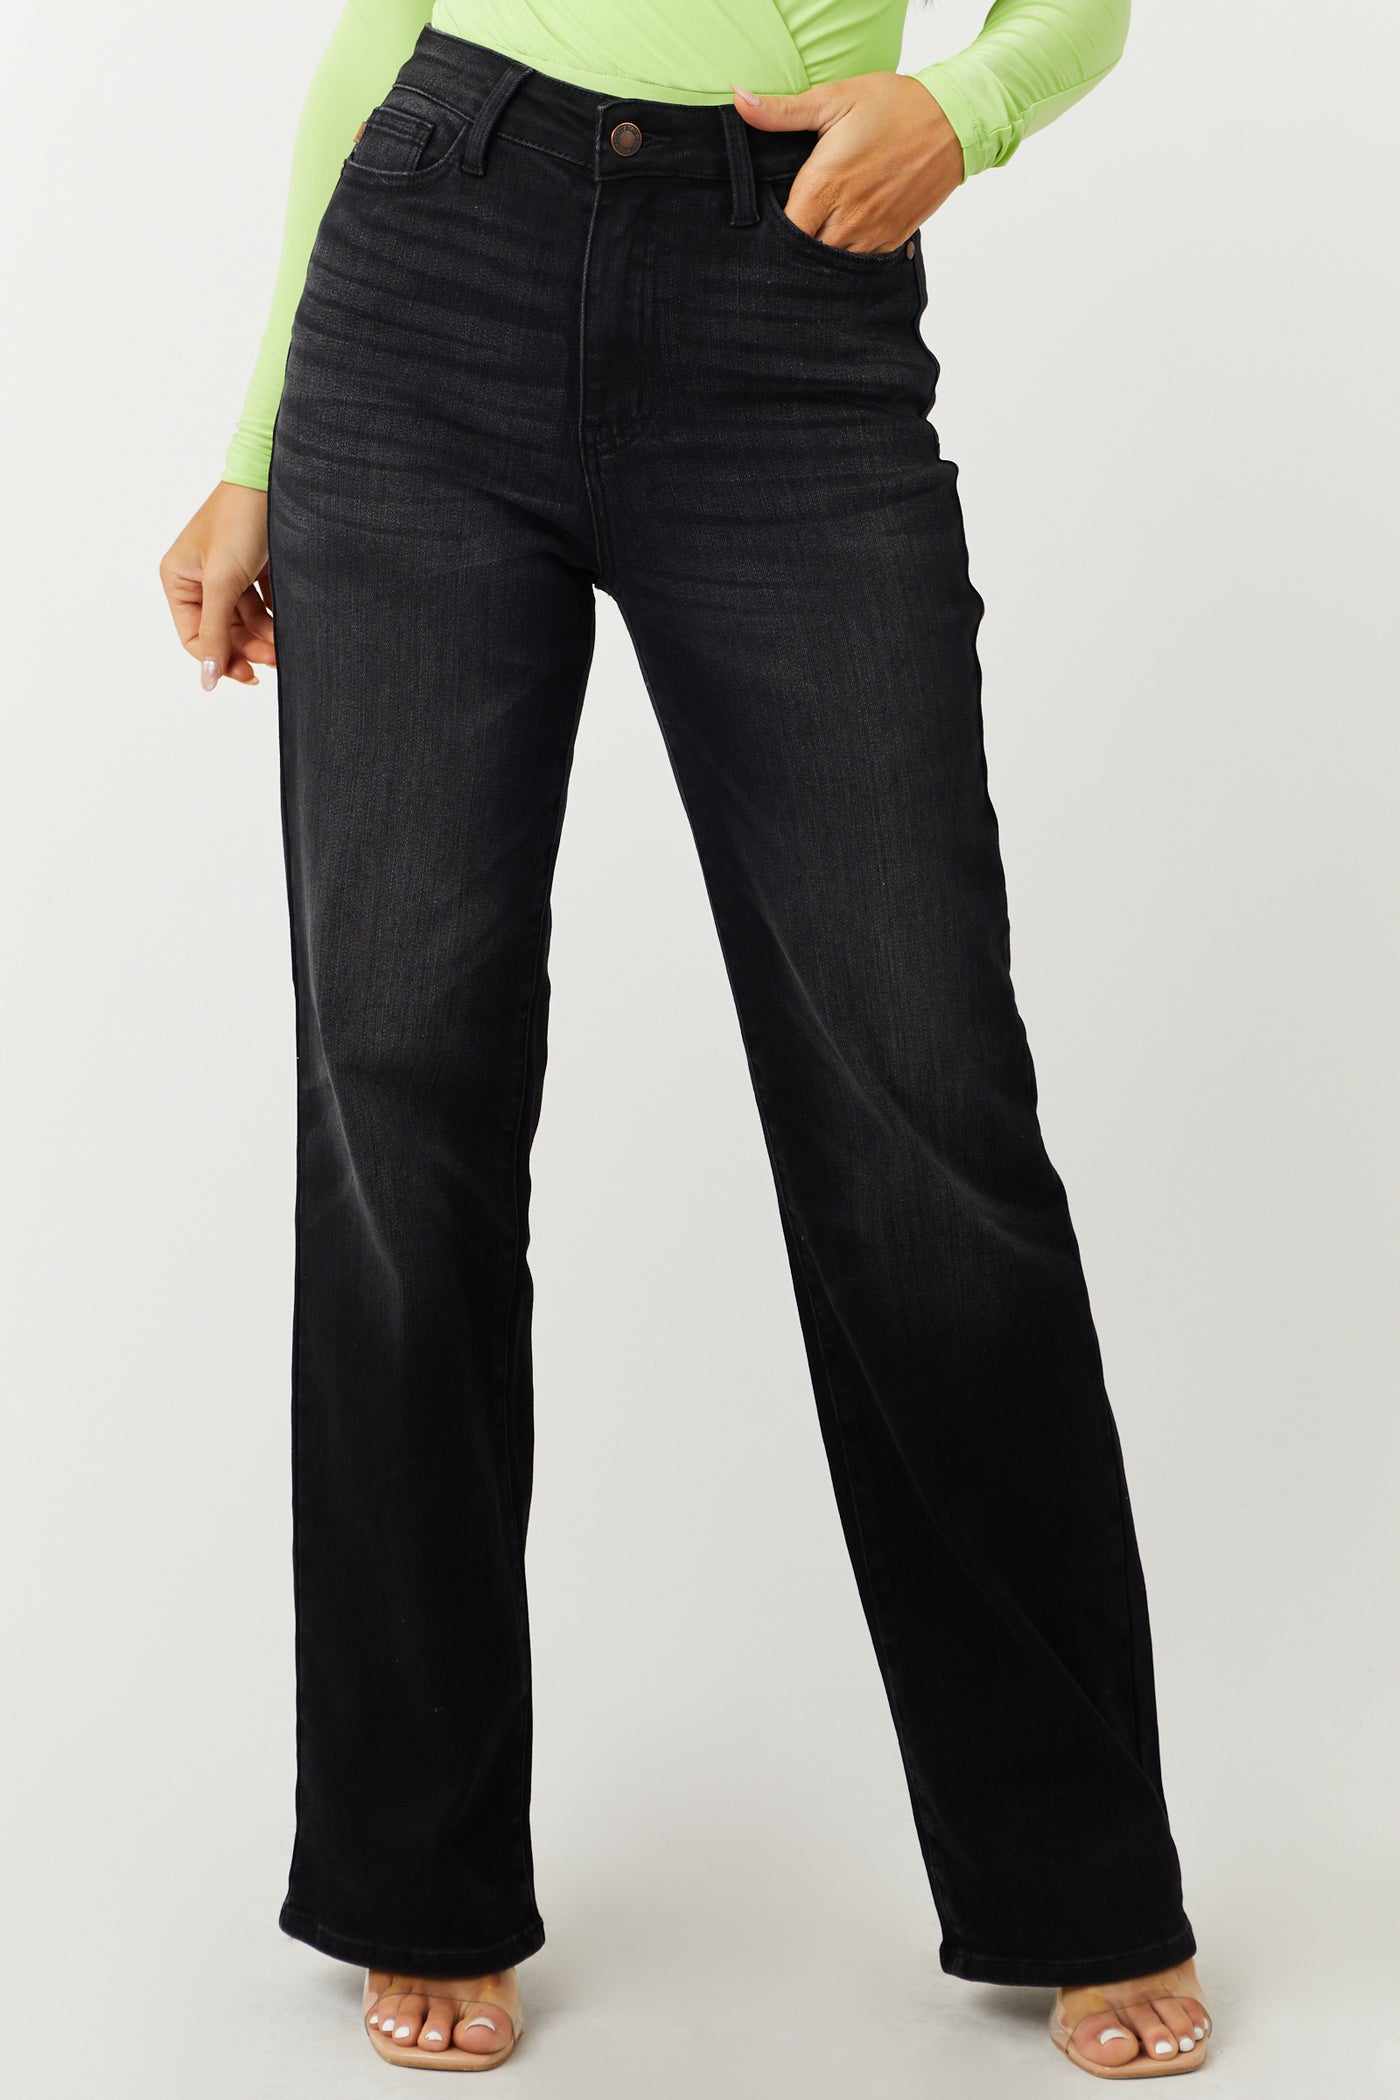 Judy Blue Washed Black High Rise Straight Leg Jeans | Lime Lush